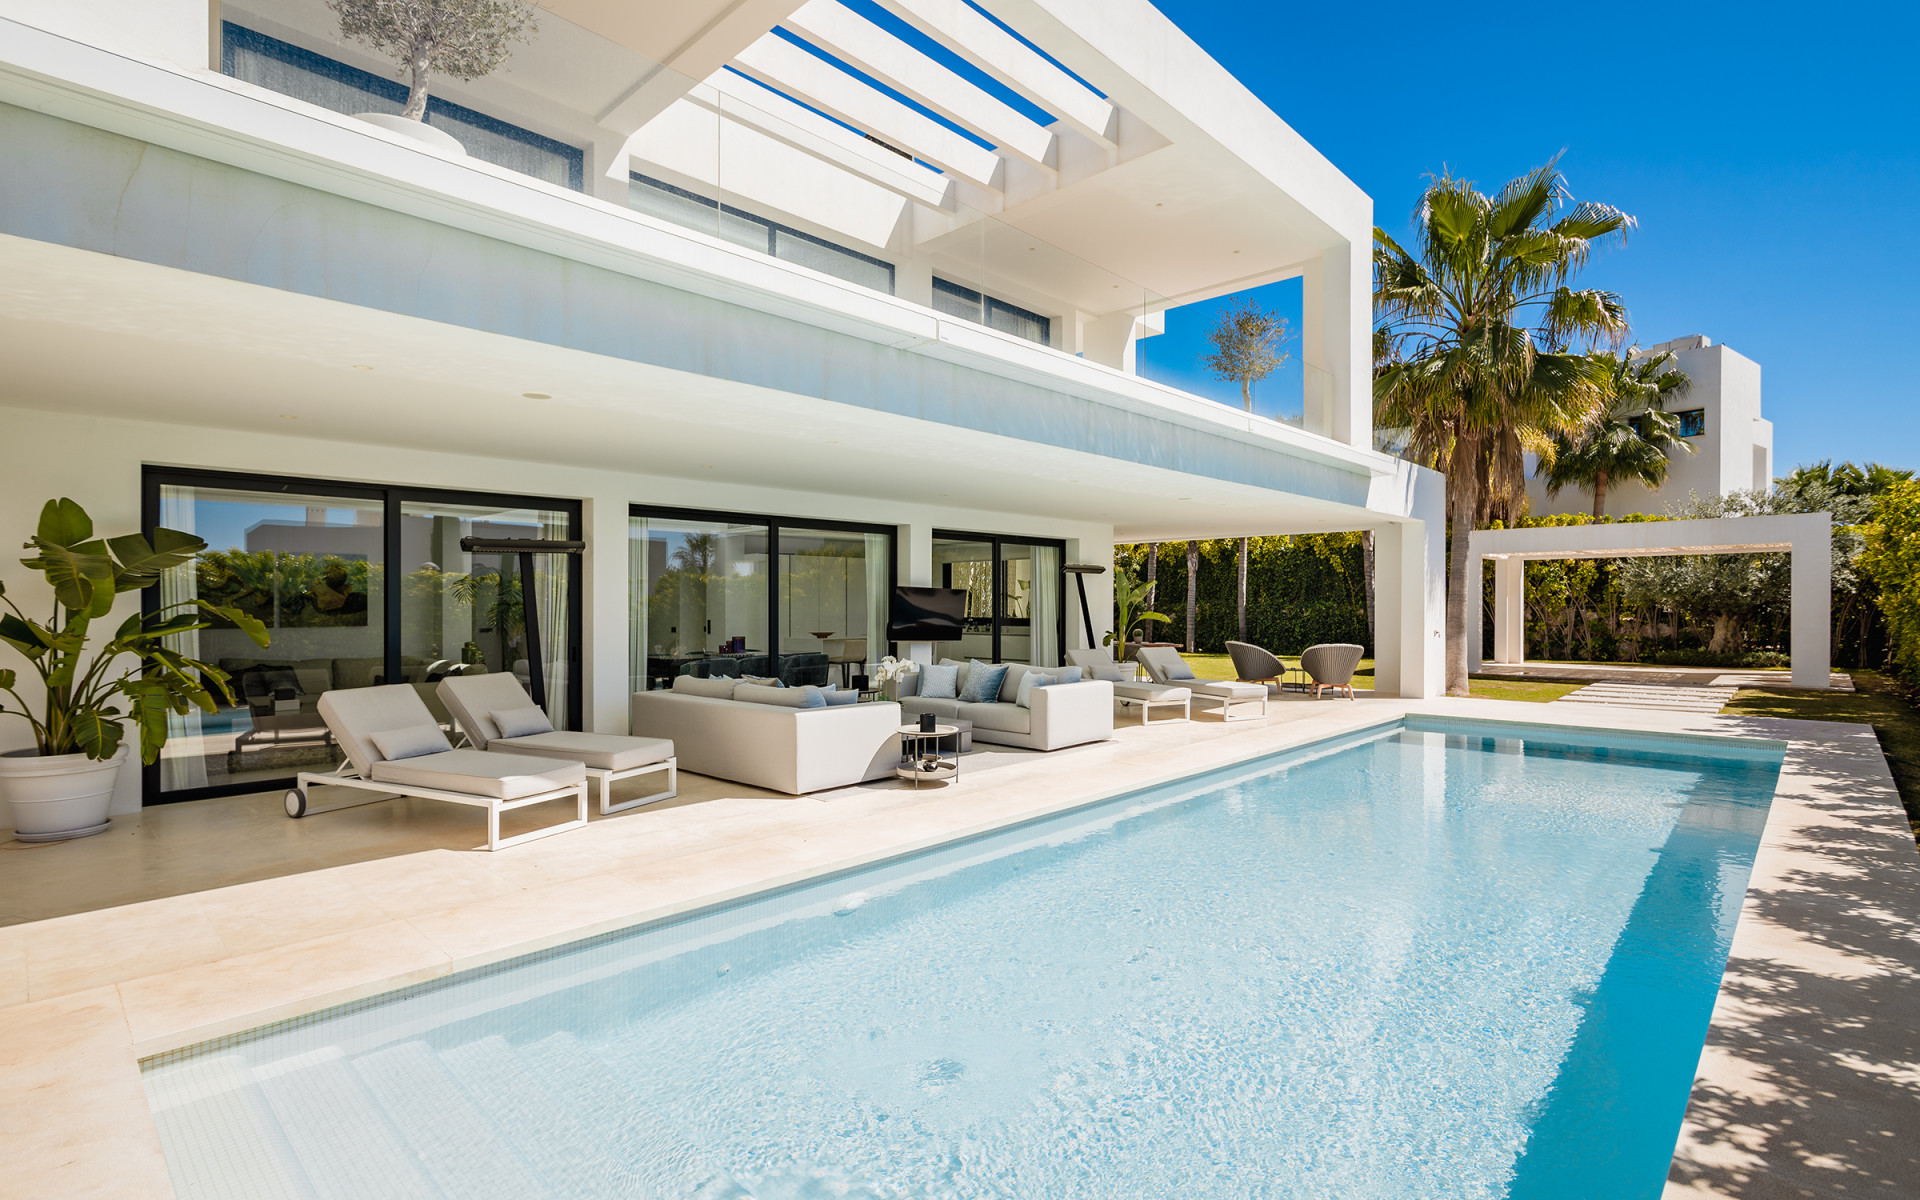 Contemporary luxury villa in a prestigious gated community within the Golf Valley